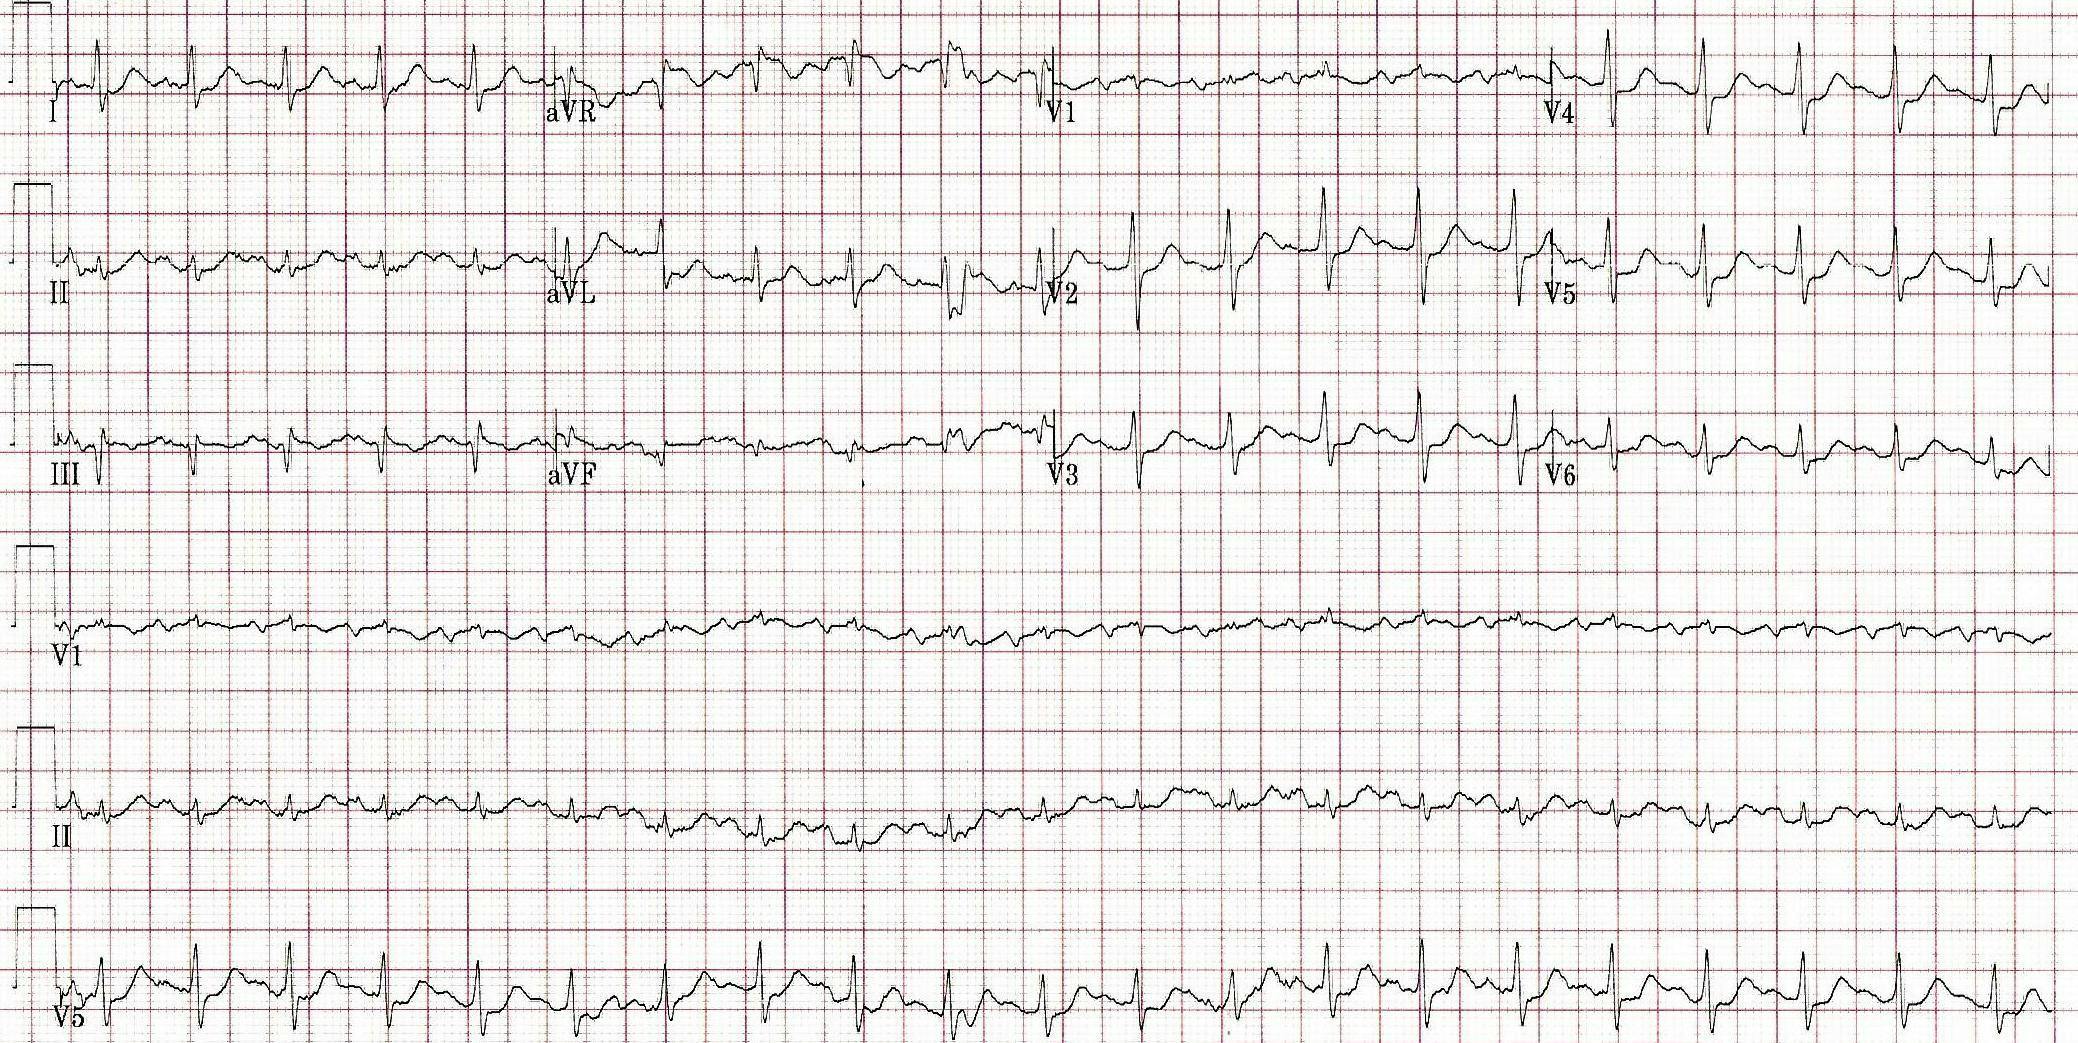 EKG of a patient experiencing alcohol withdrawal.